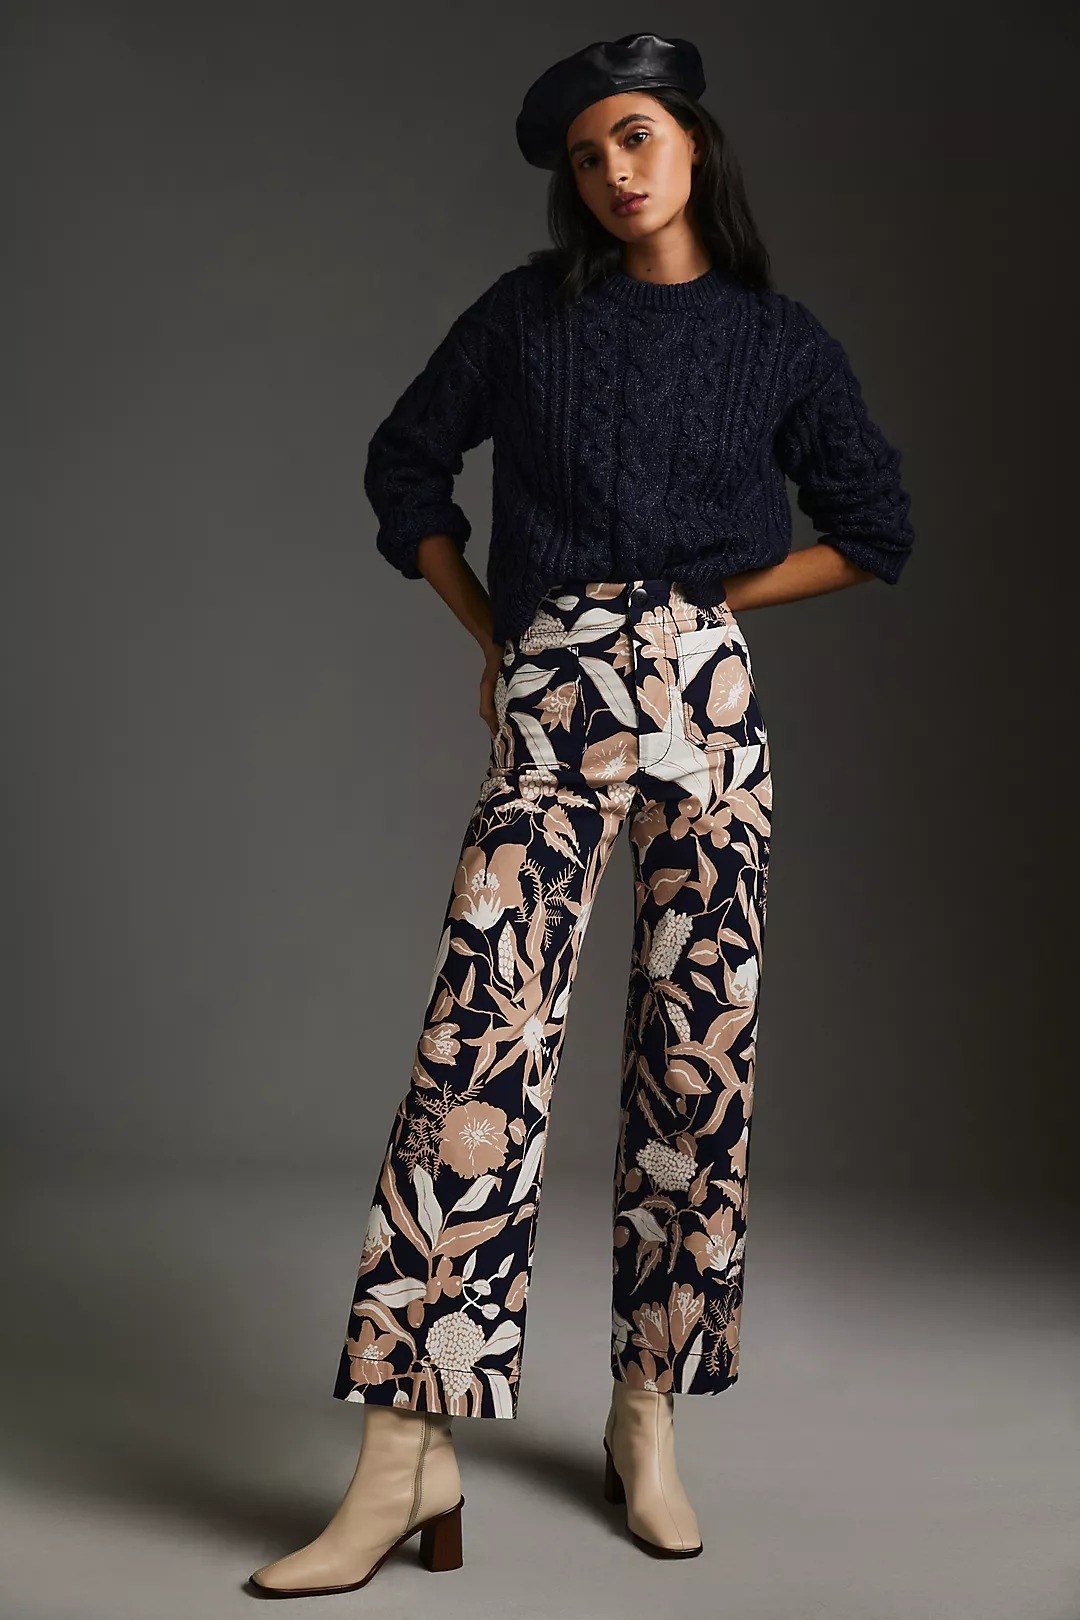 a model wearing the brown, tan and navy leaf patterned pants